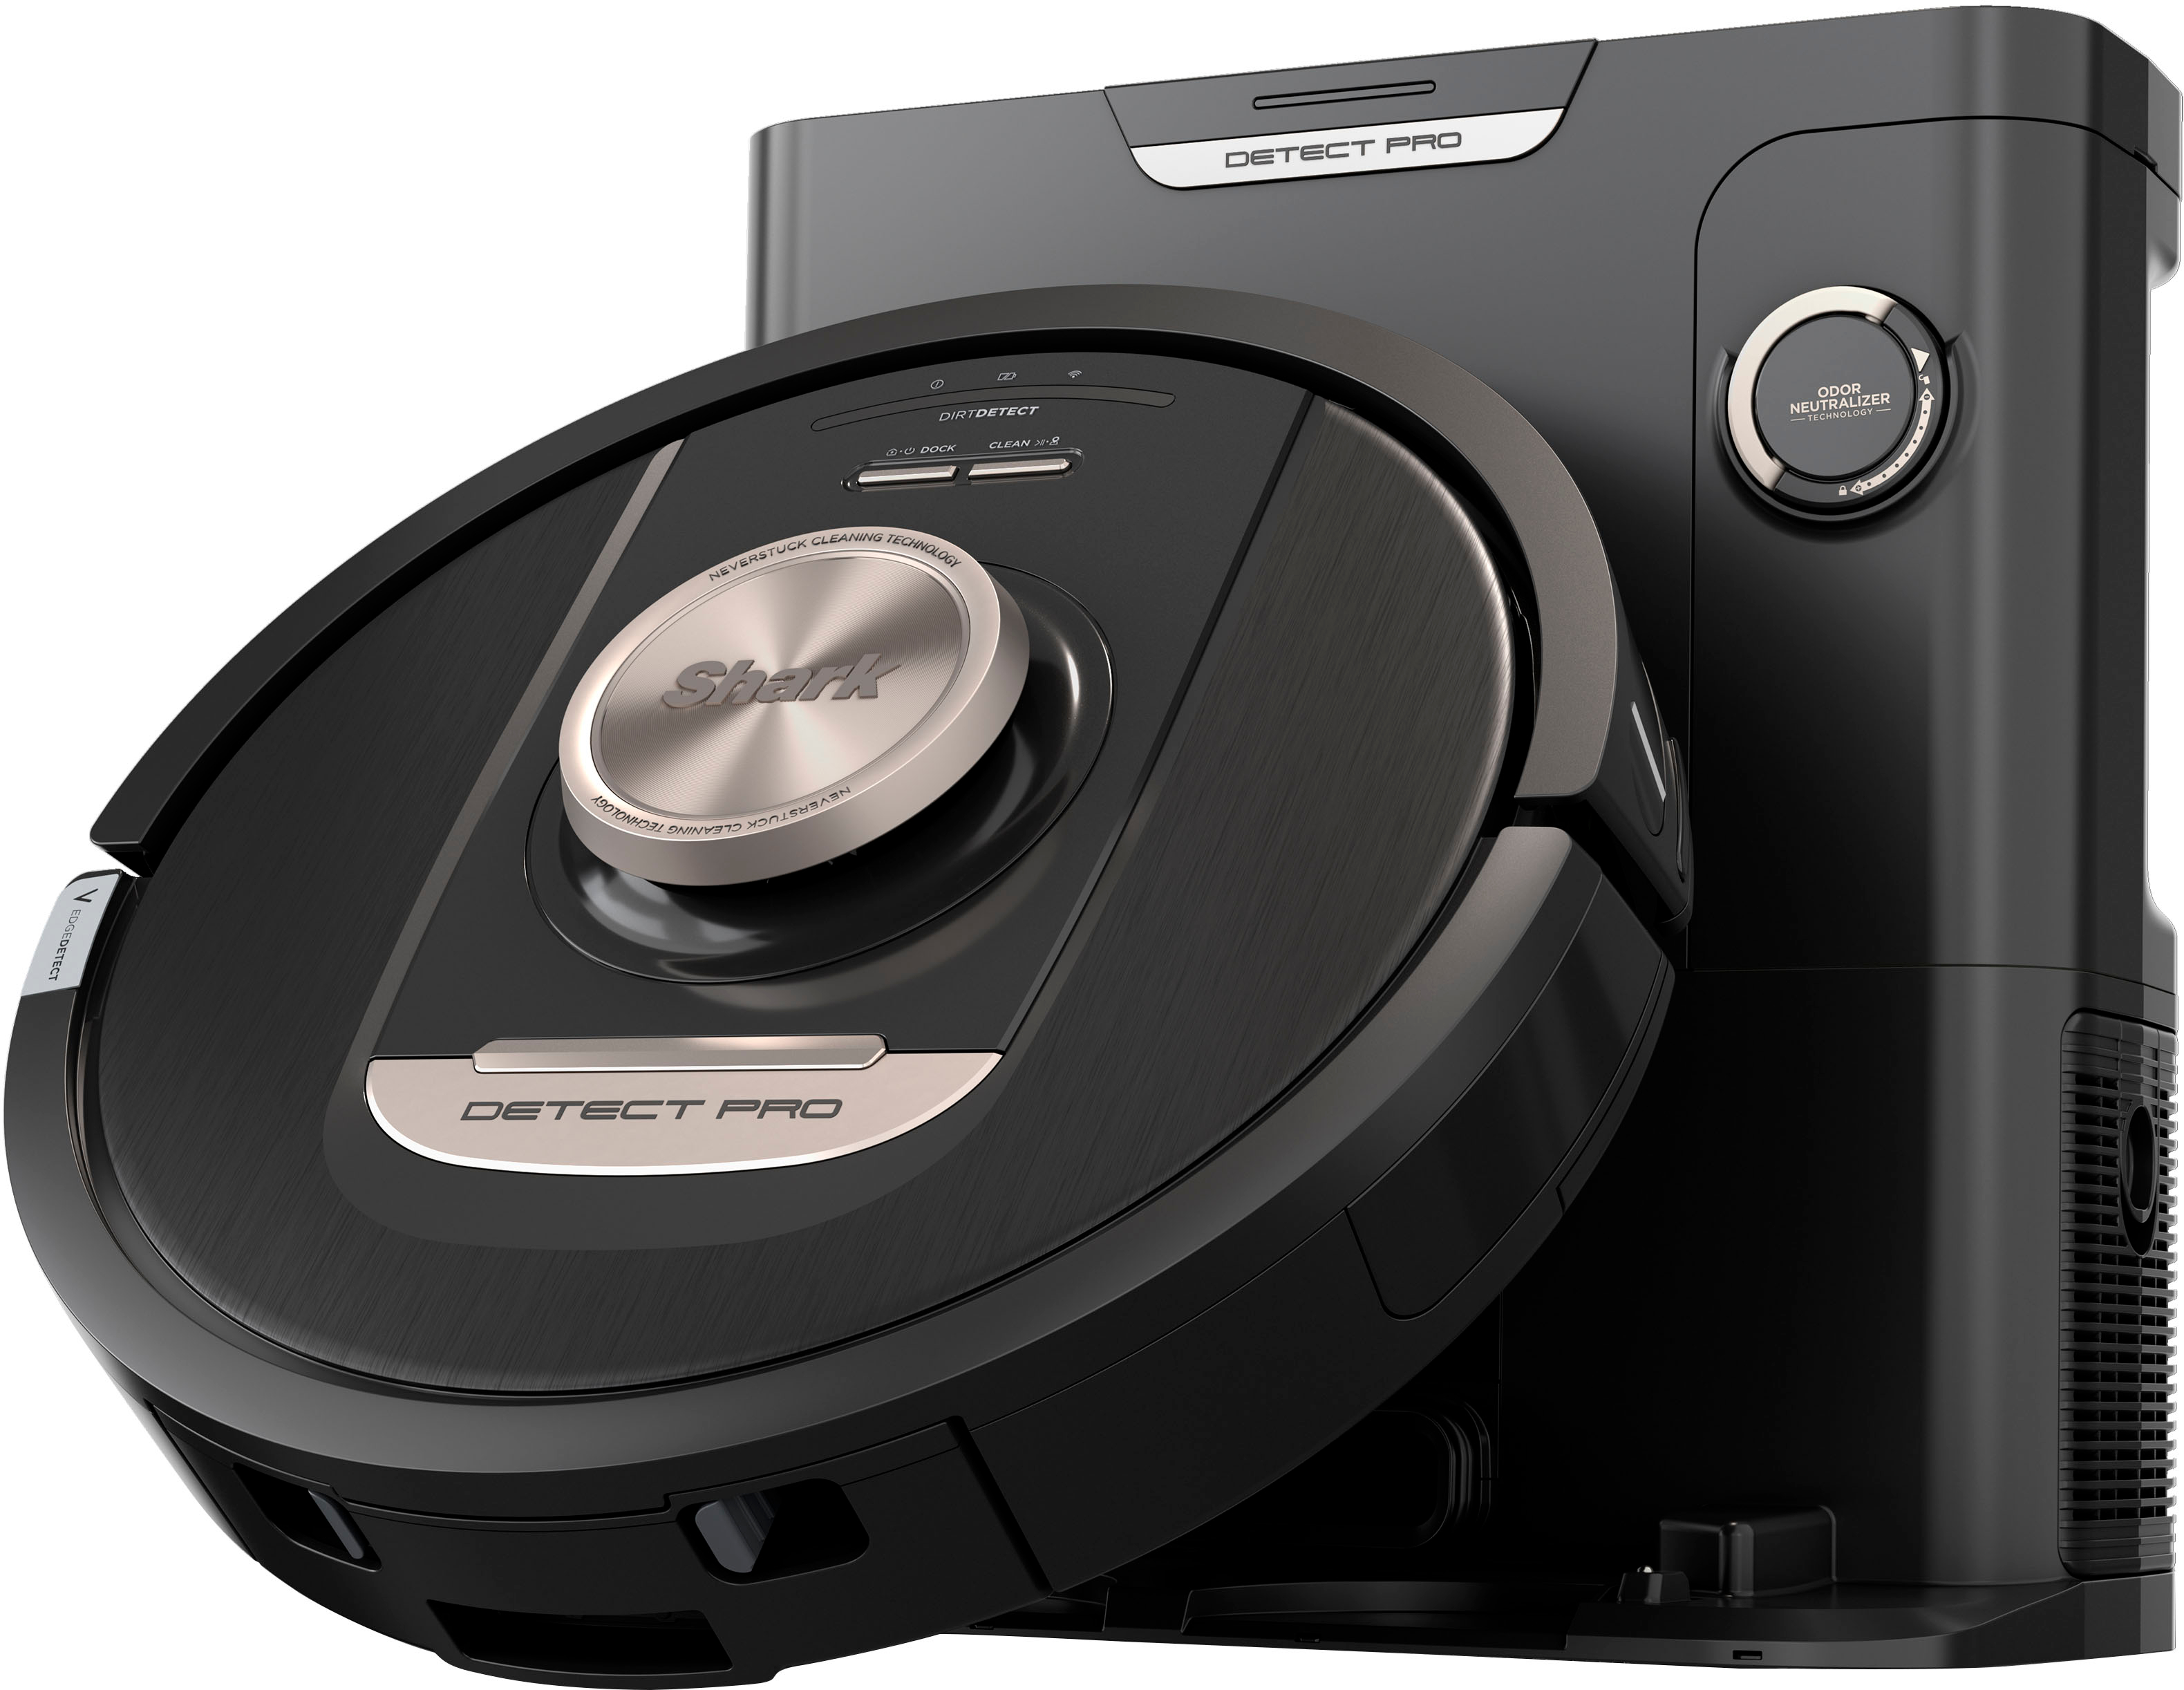 6 robot vacuums for hardwood to buy on Black Friday